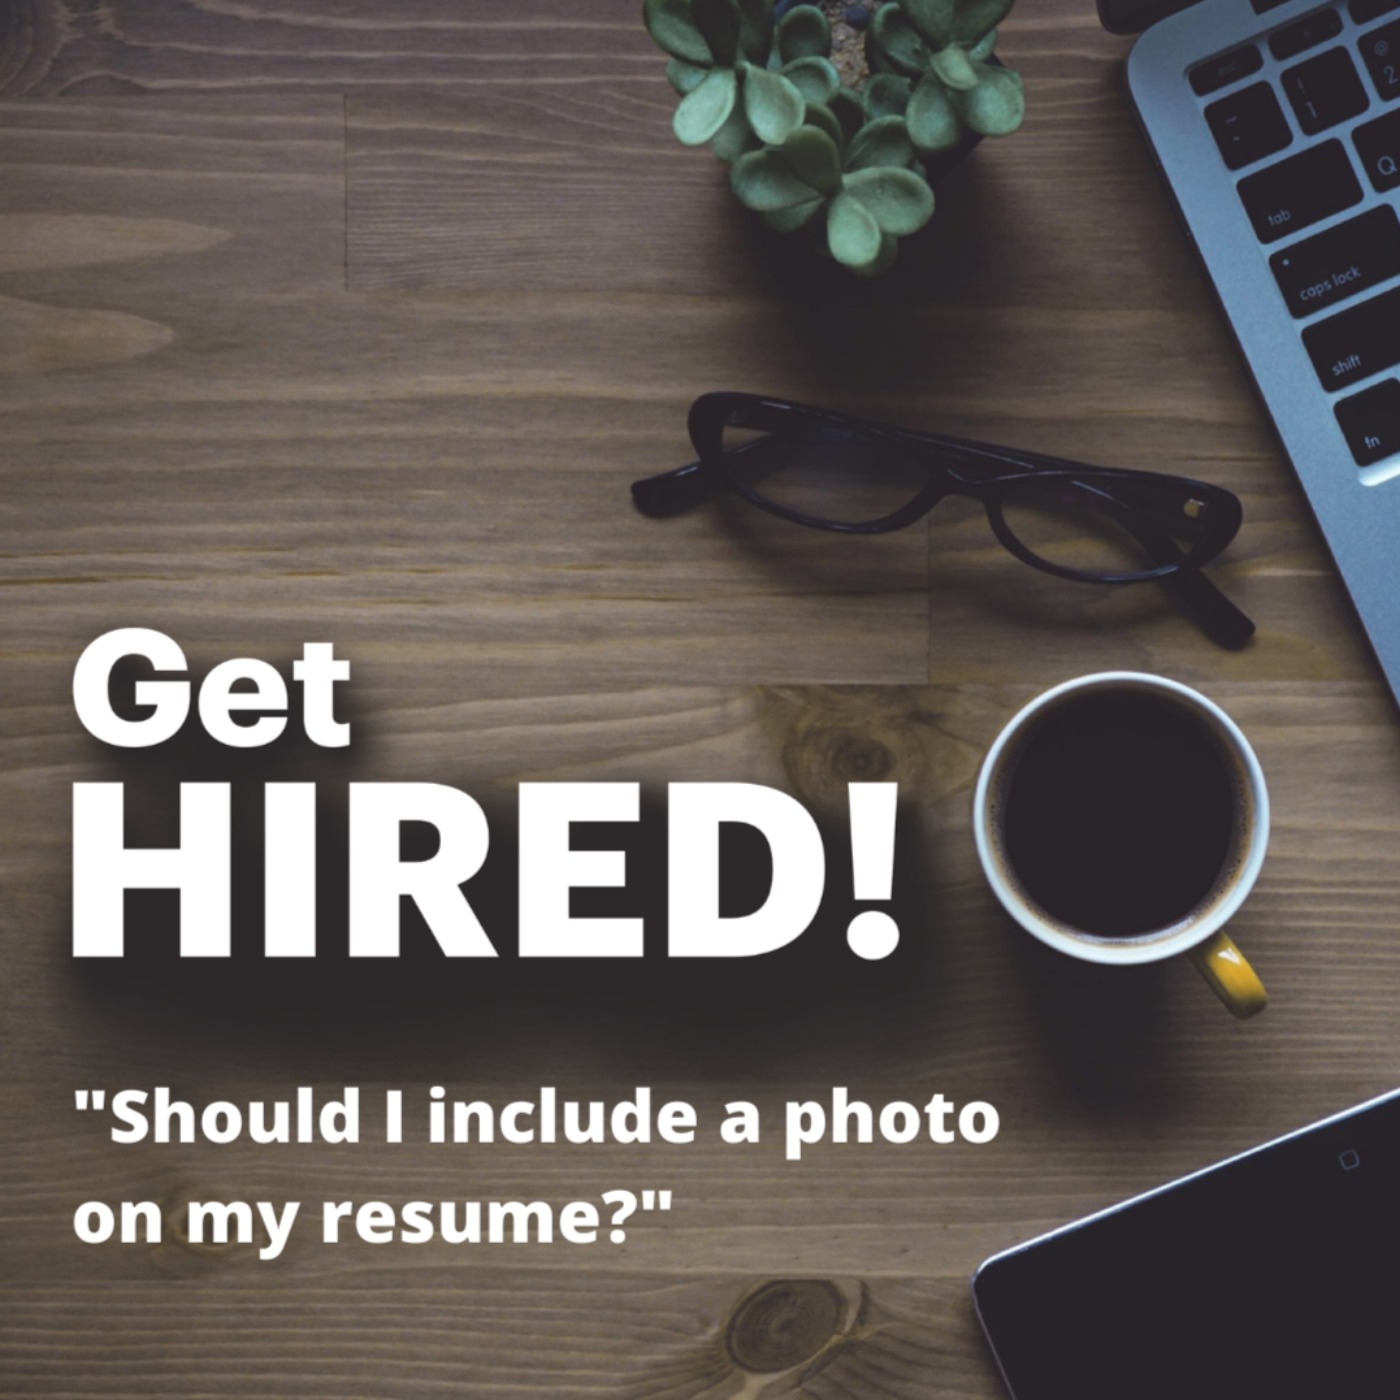 Get Hired: "Should I include a photo on my resume?"